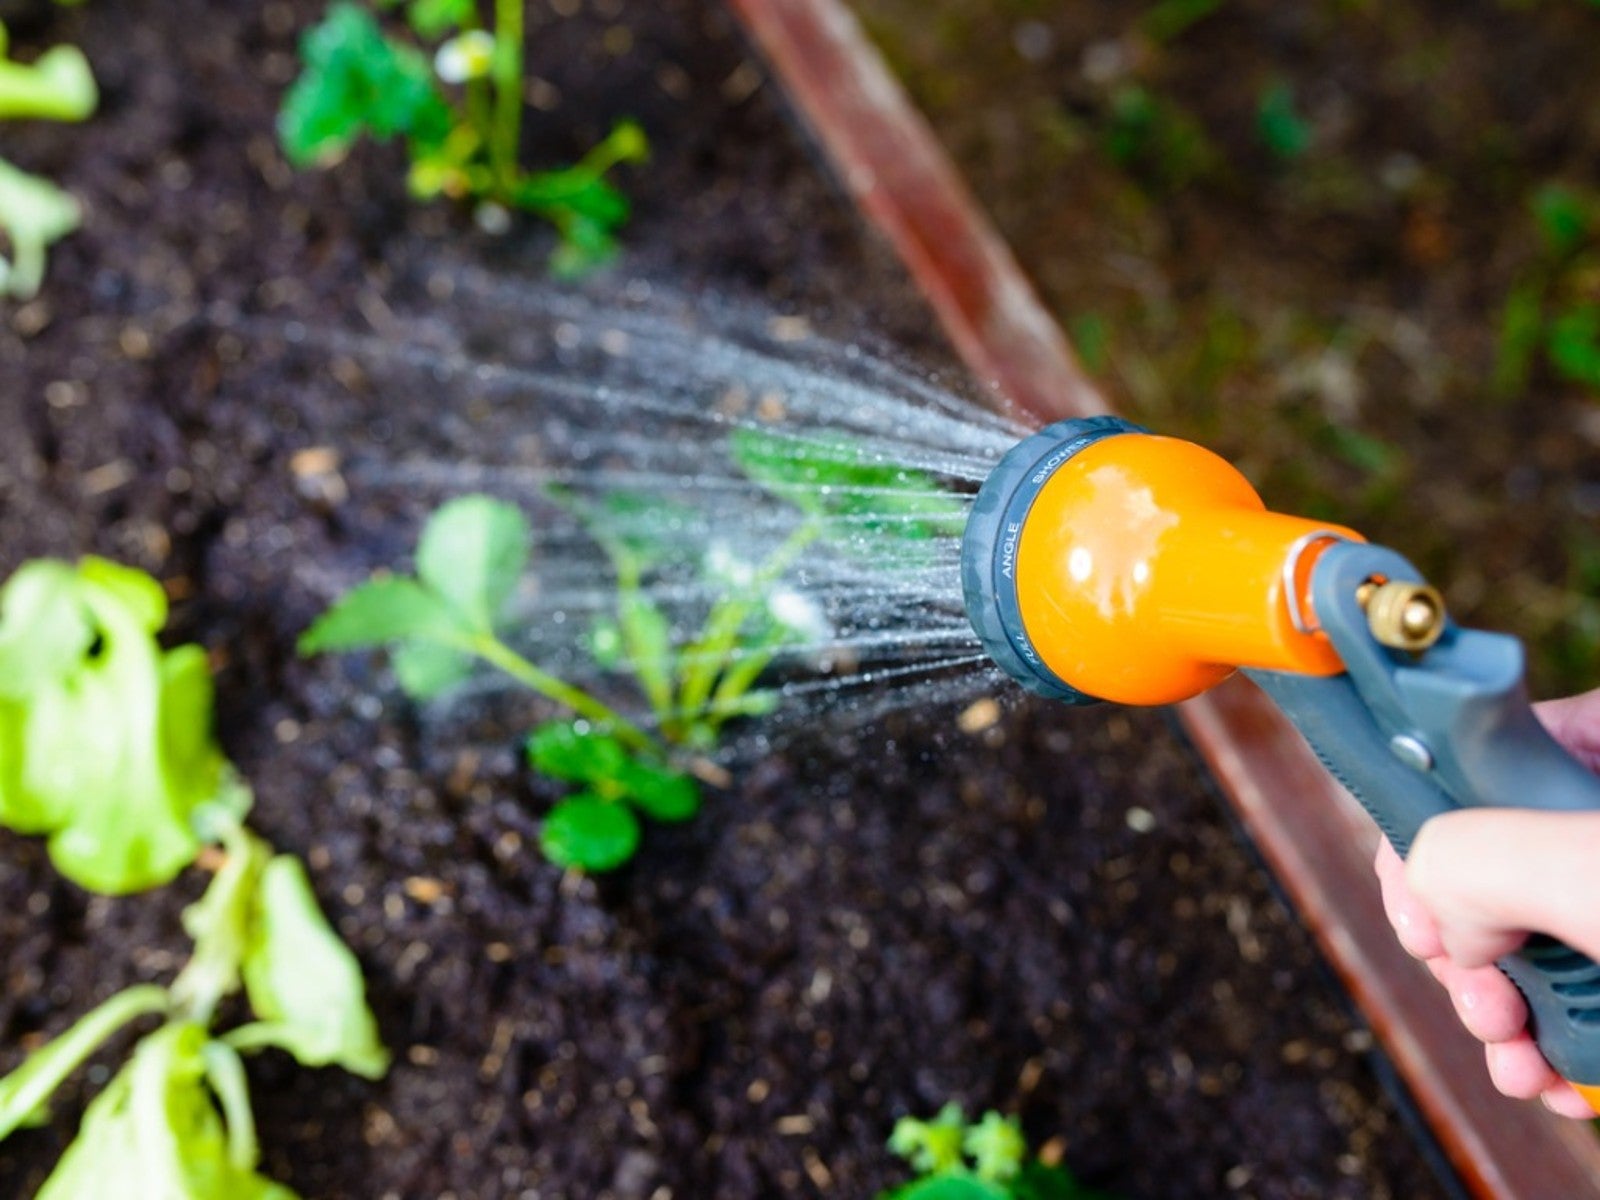 How Often You Need to Water Your Vegetable Garden